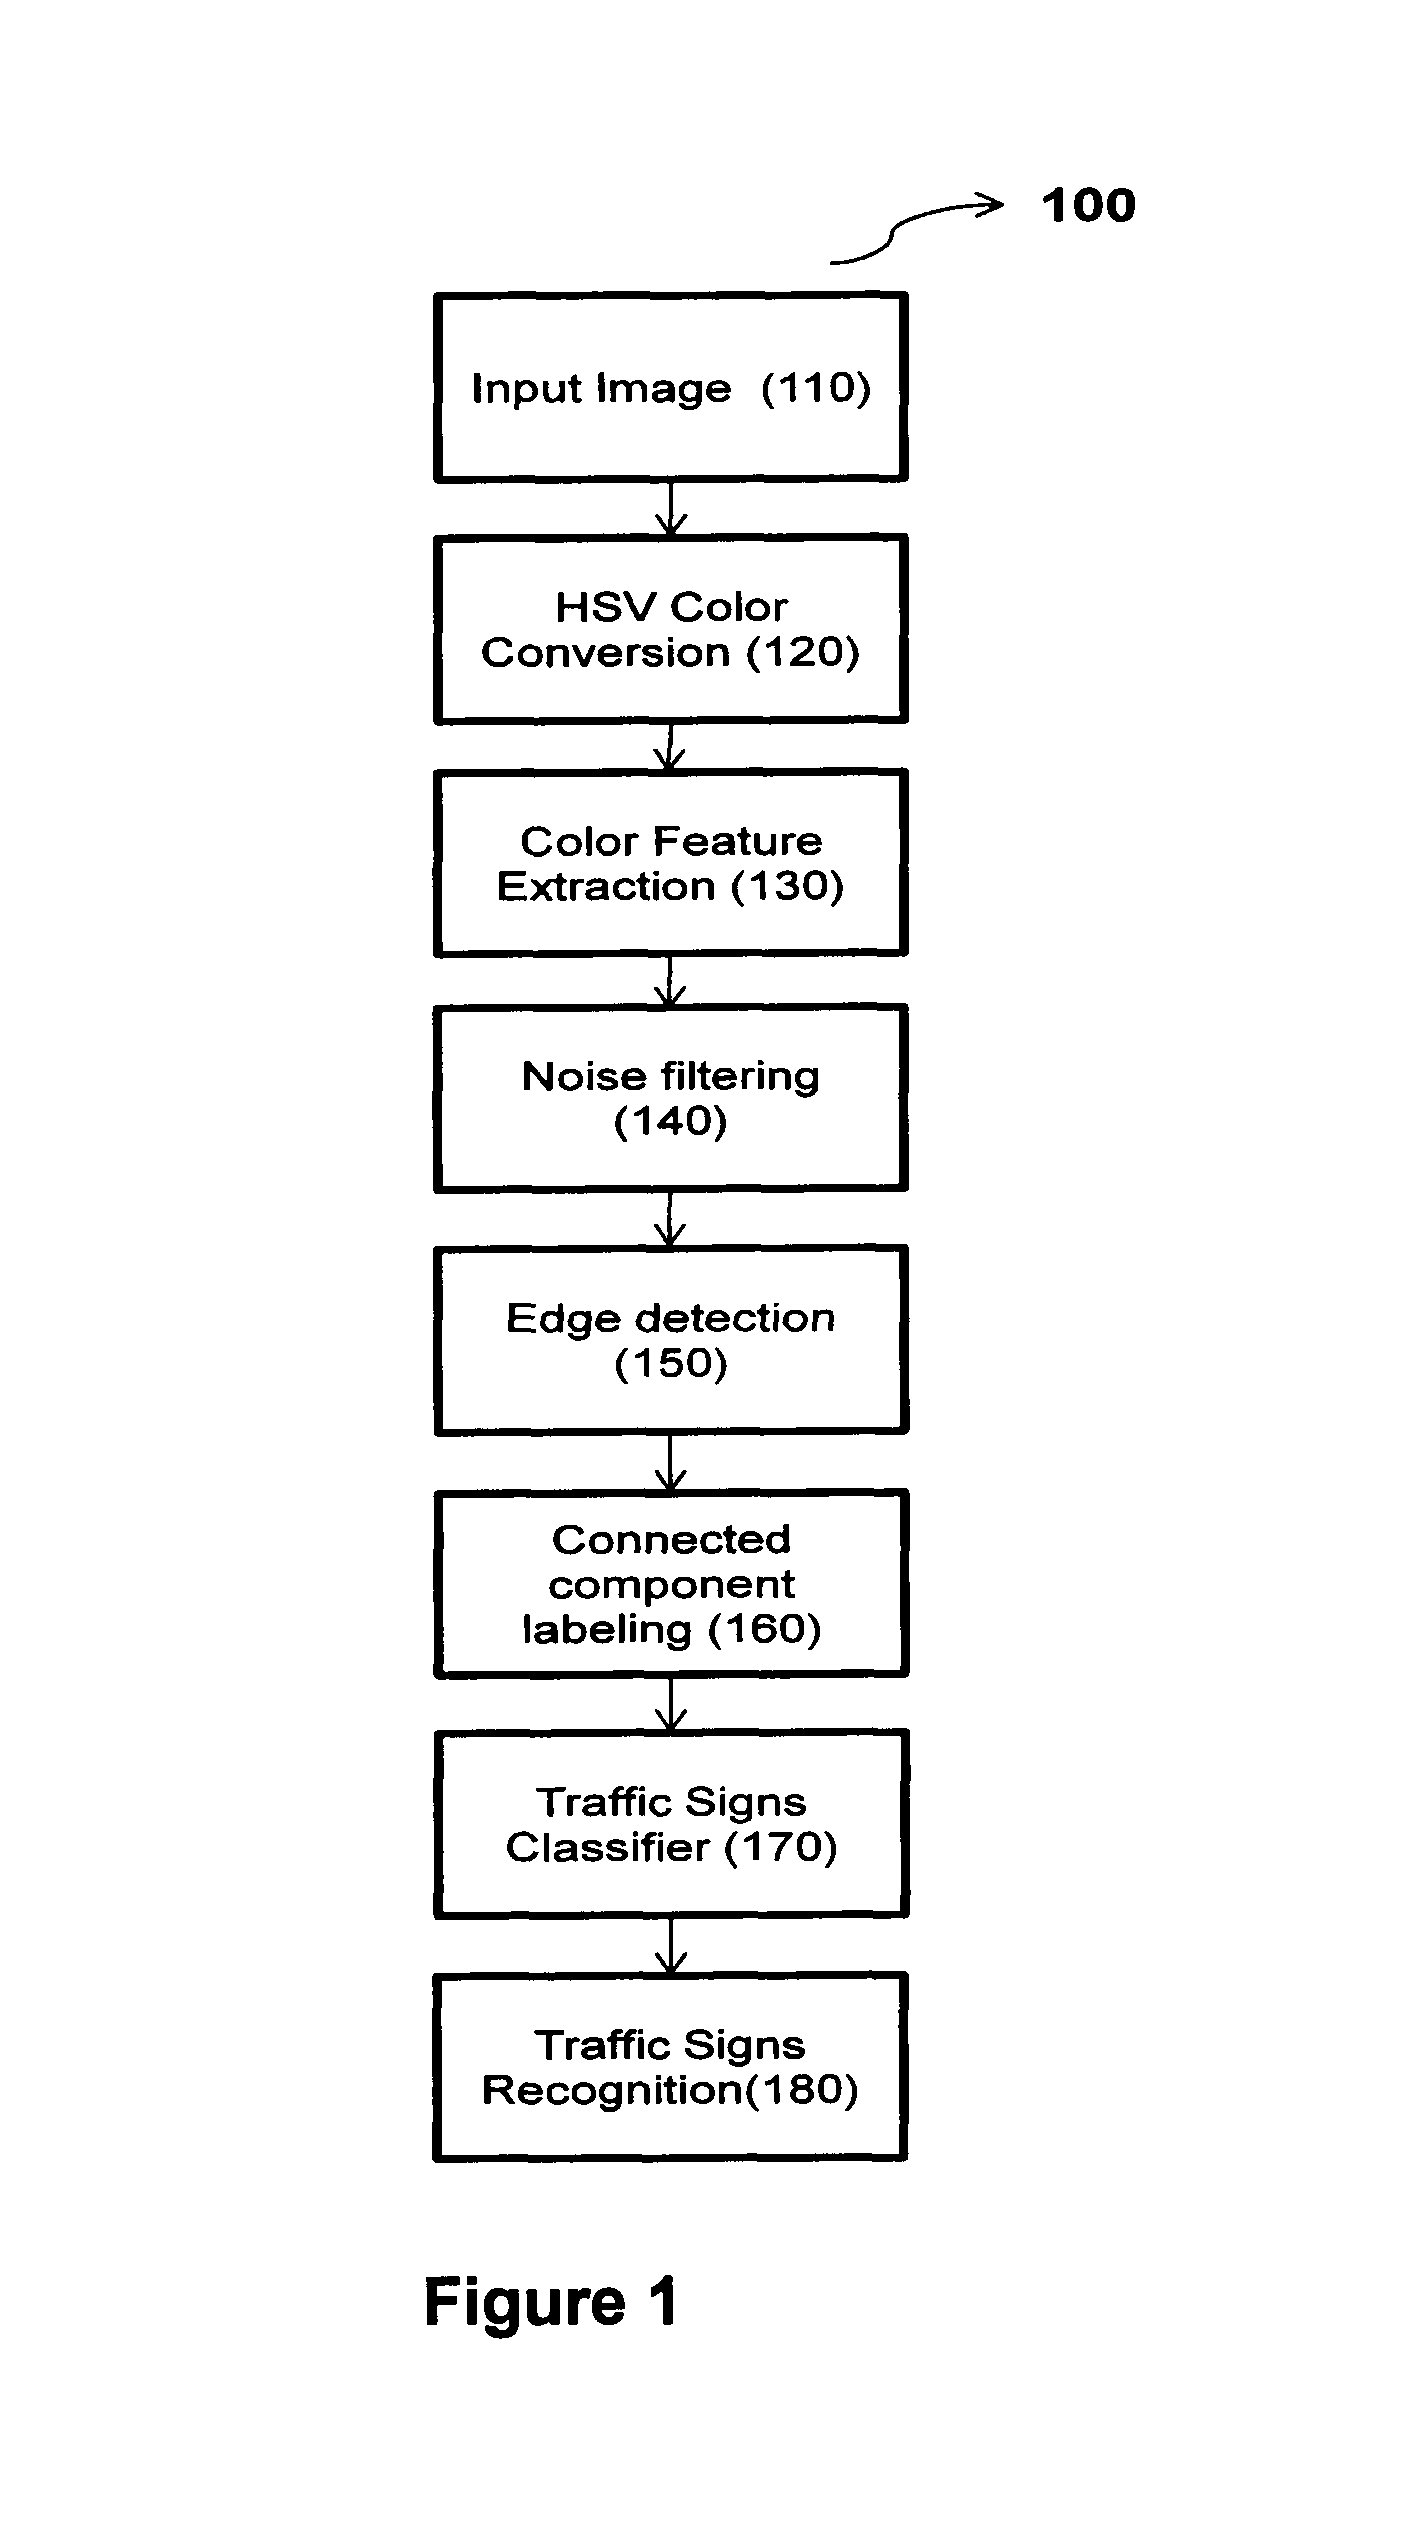 Illumination invariant and robust apparatus and method for detecting and recognizing various traffic signs